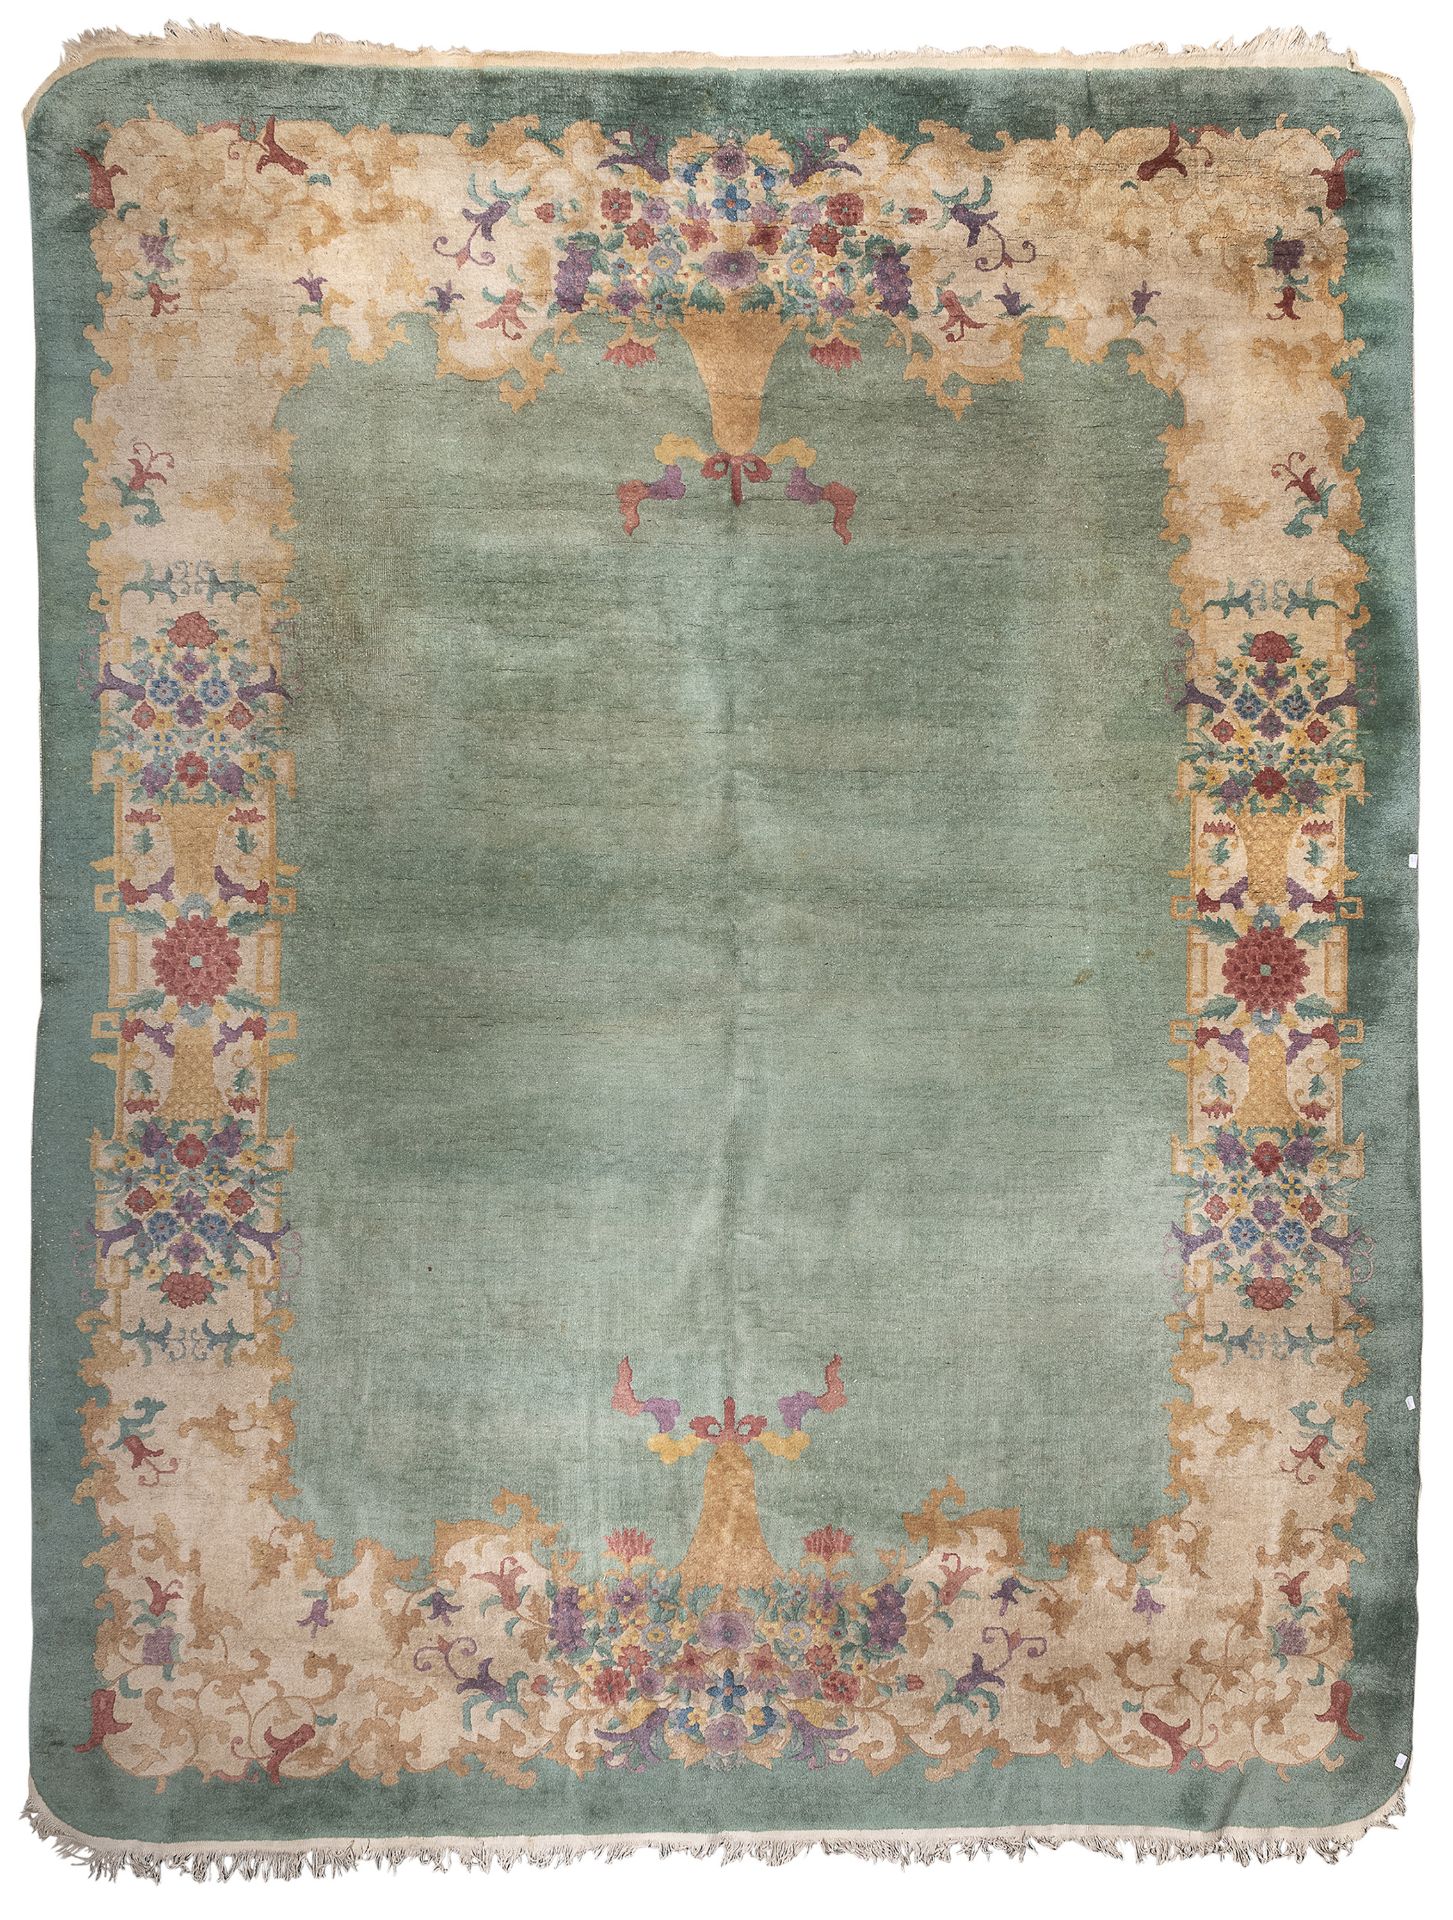 A CHINESE TIEN-TSIN CARPET EARLY 20TH CENTURY